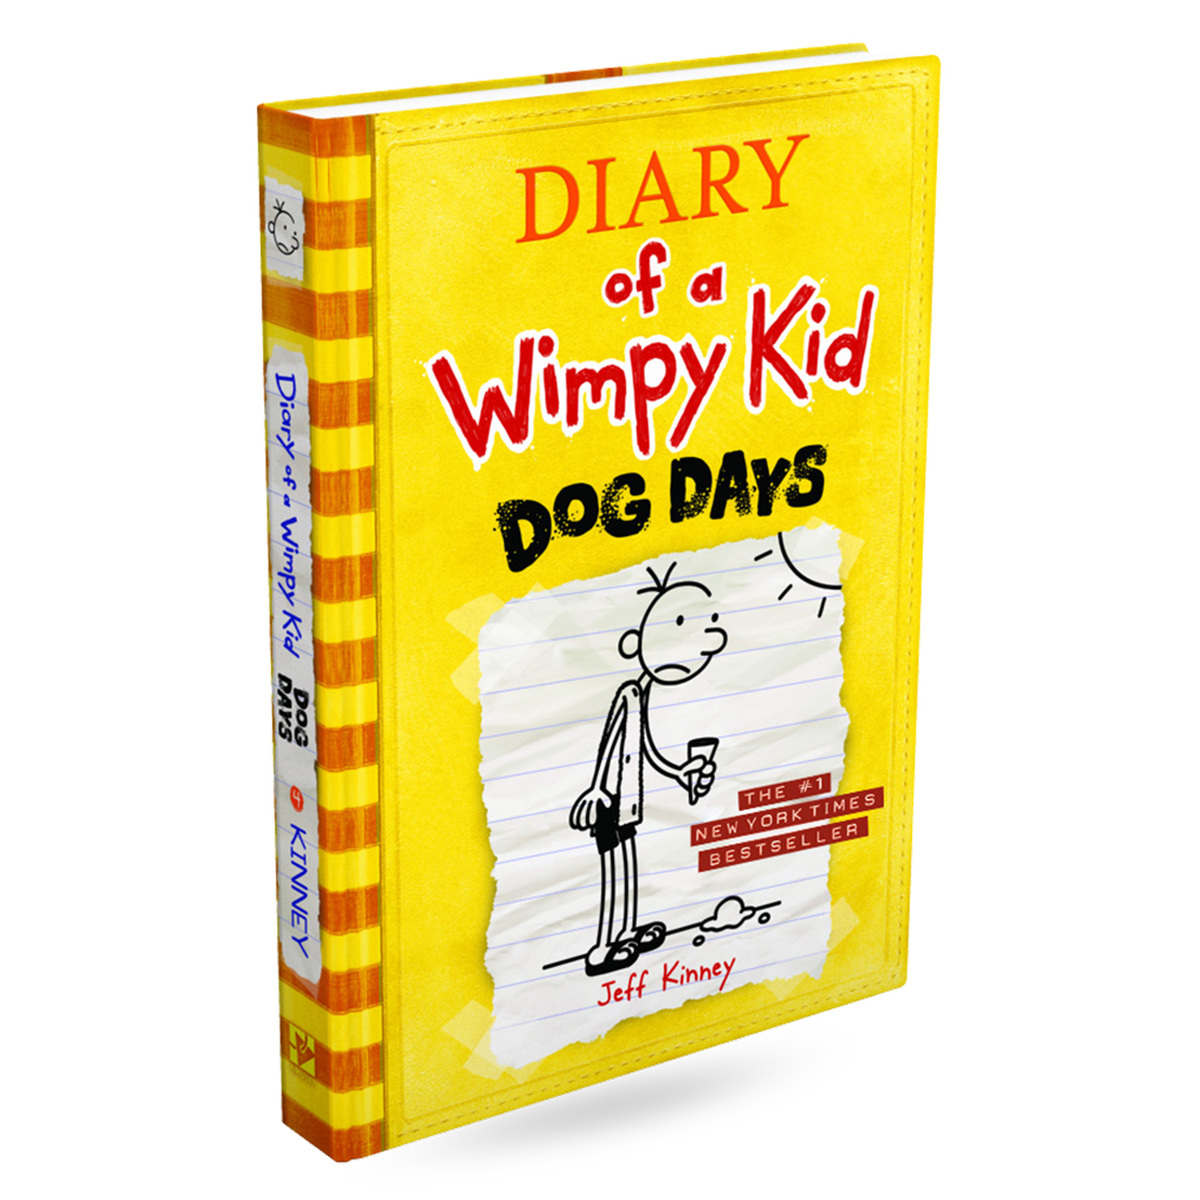 Wimpy Kids Story Book Assorted - 1 Piece